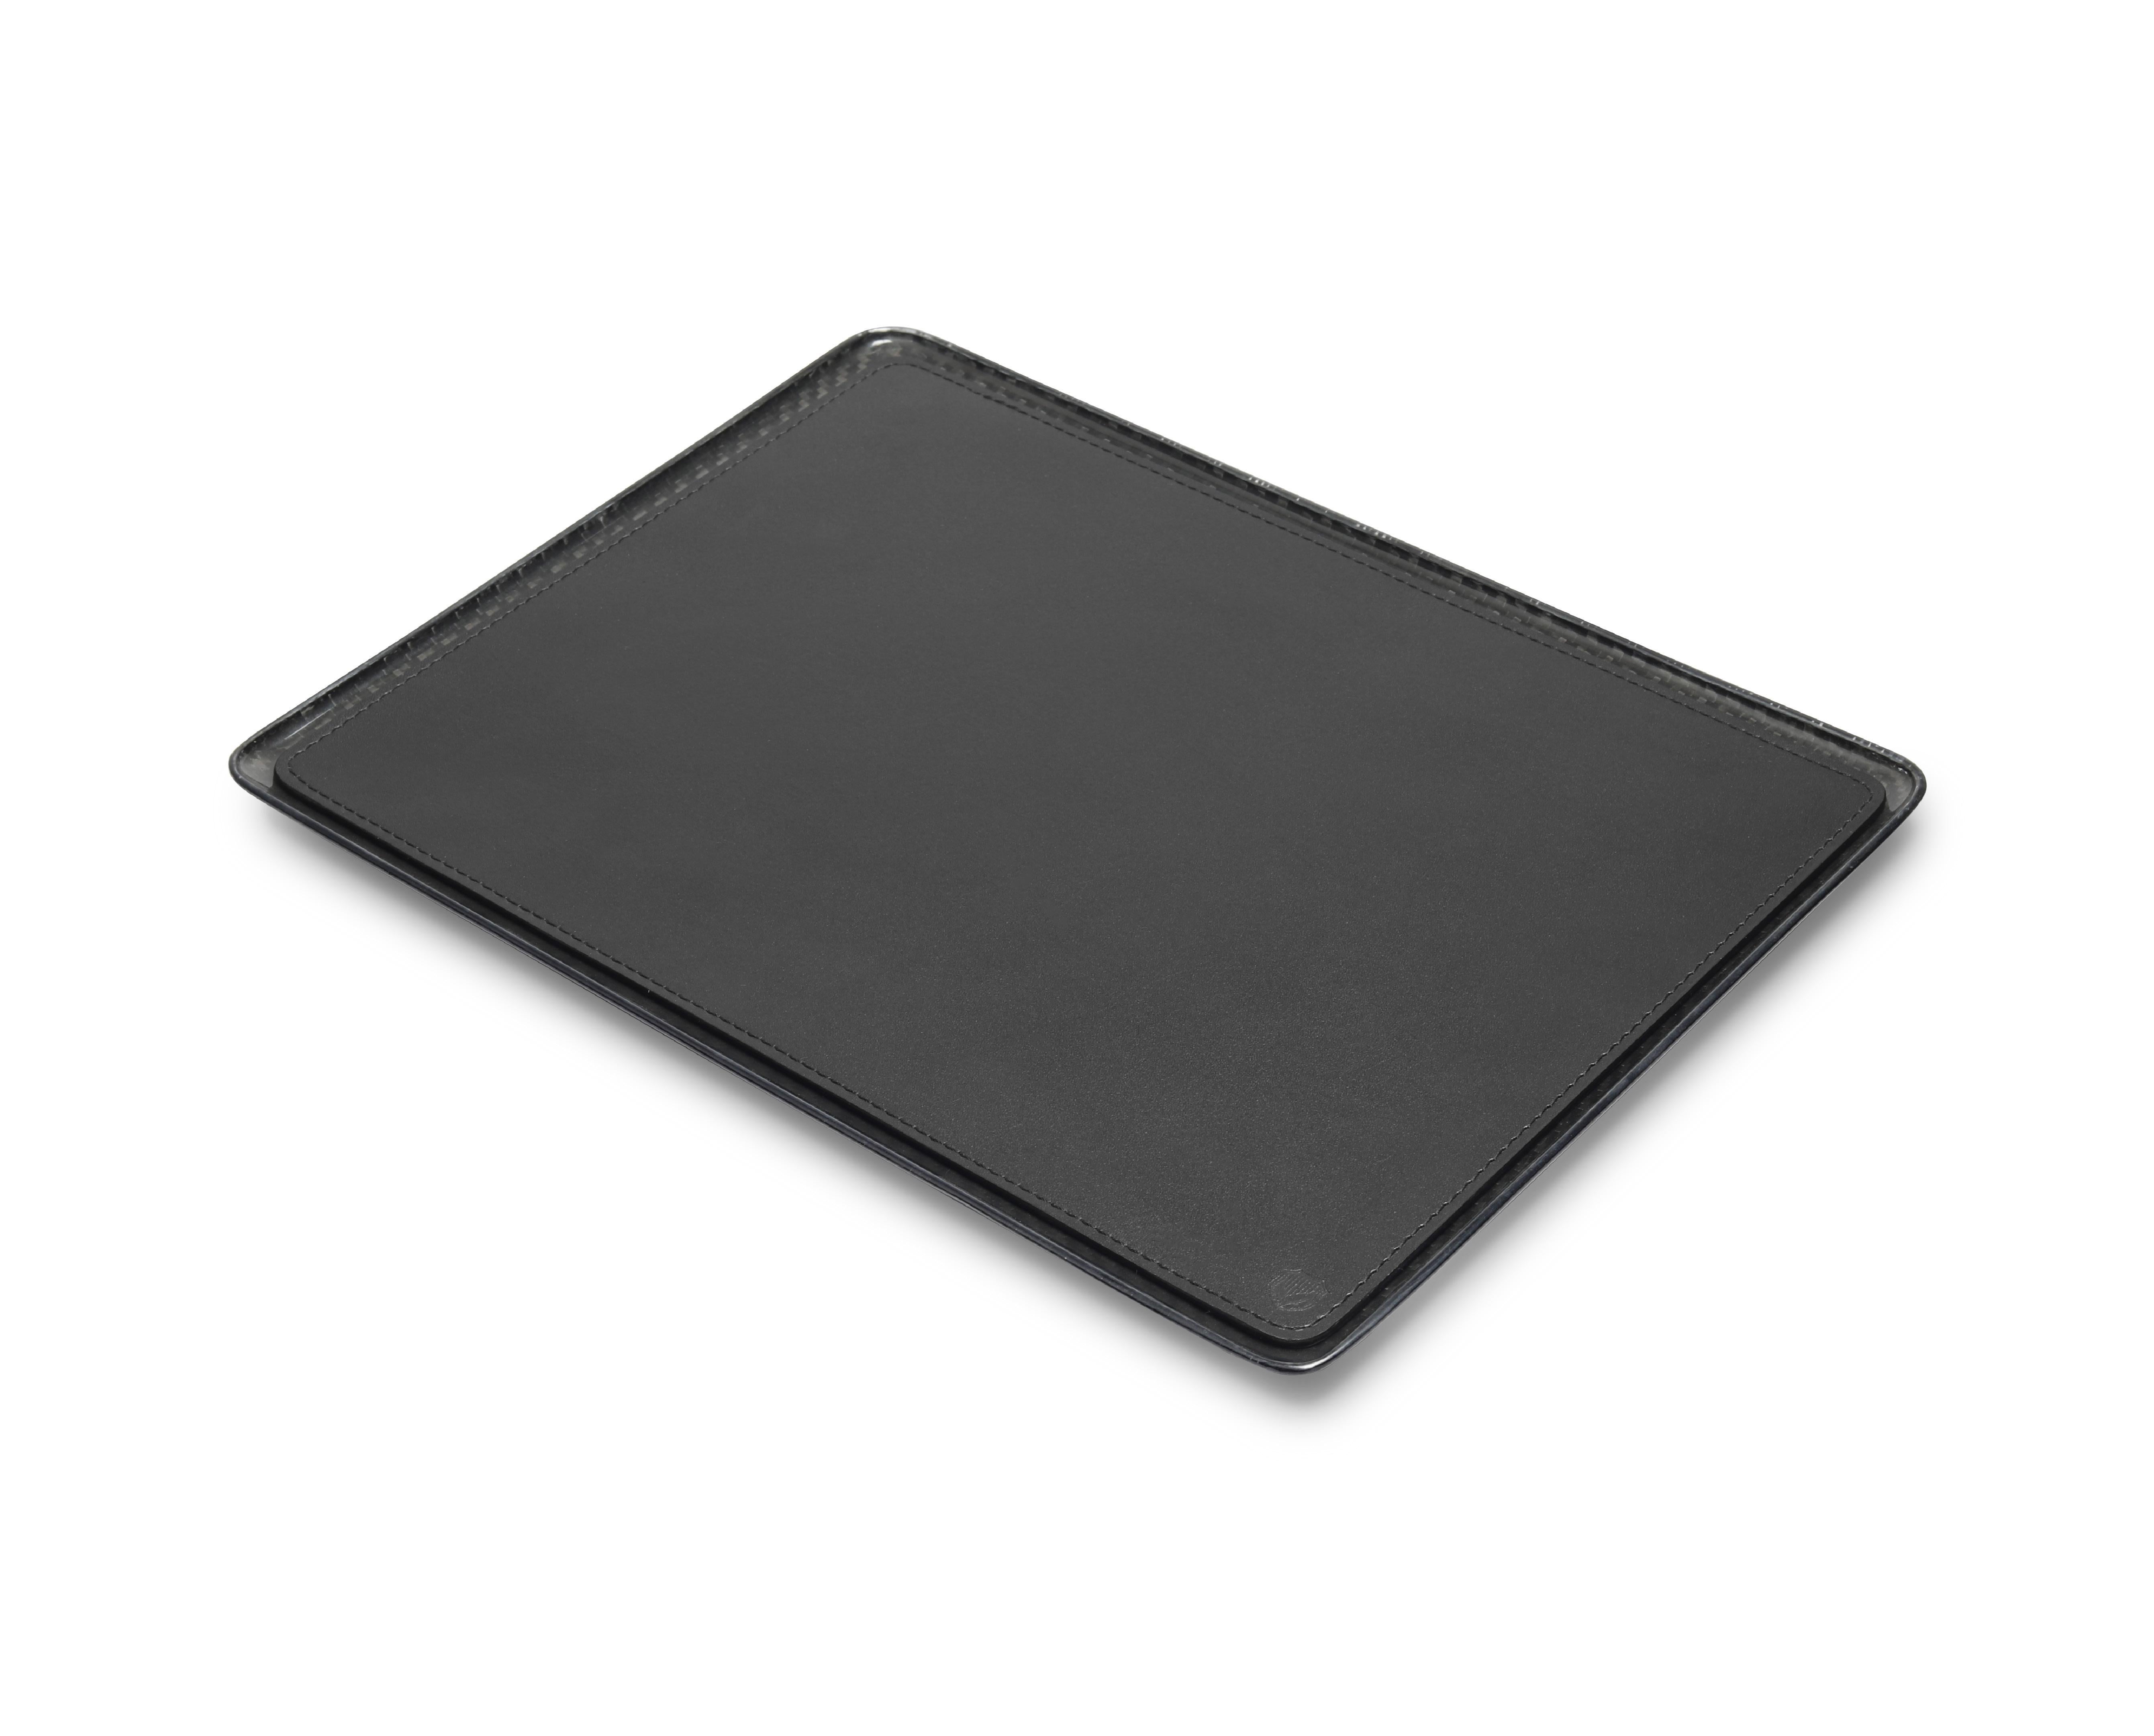 Talon A4 desk tray by Madheke
Dimensions: D 25 x W 33.7 x H 1.5 cm.
Materials: Leather, carbon fiber.

A desk should not be a place of disarray and clutter, with the TALON A4 Tray it won't be. All essential correspondence can be placed neatly in